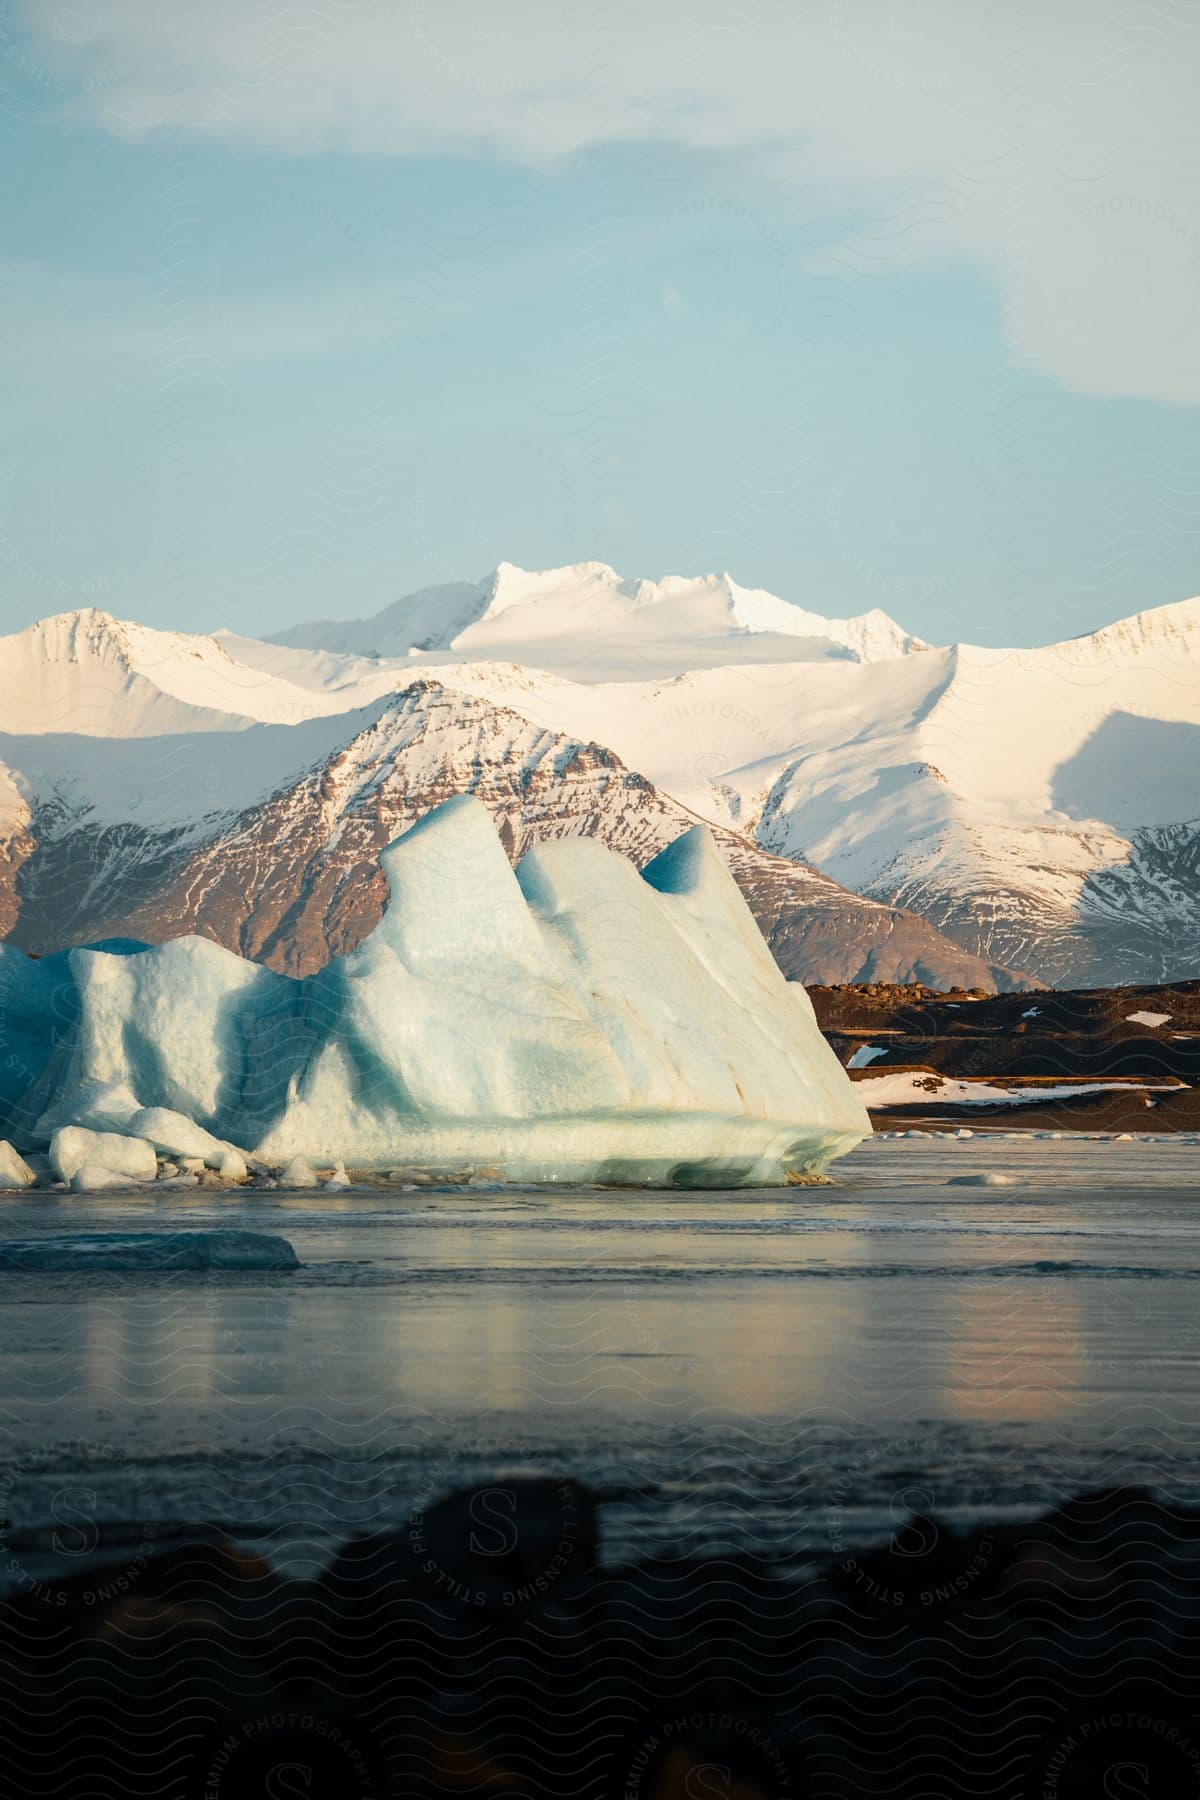 Melting iceberg in the water with snow covered mountains along the coast